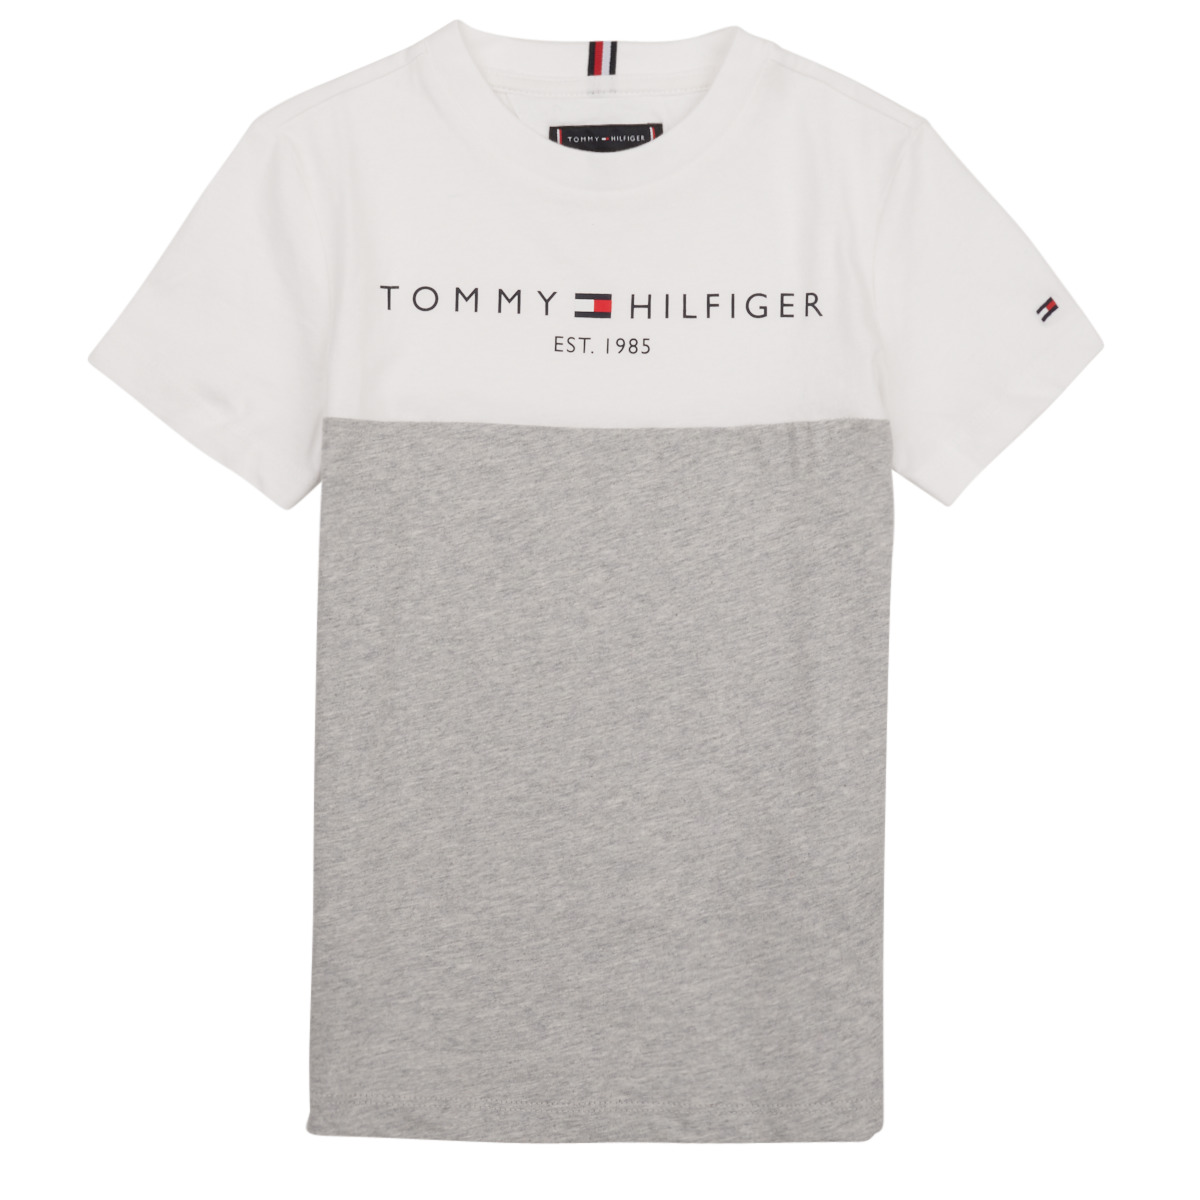 Tommy Hilfiger S/S short-sleeved 30,40 - Spartoo Europe Grey TEE - ESSENTIAL delivery € ! White t-shirts | Clothing / COLORBLOCK Fast Child